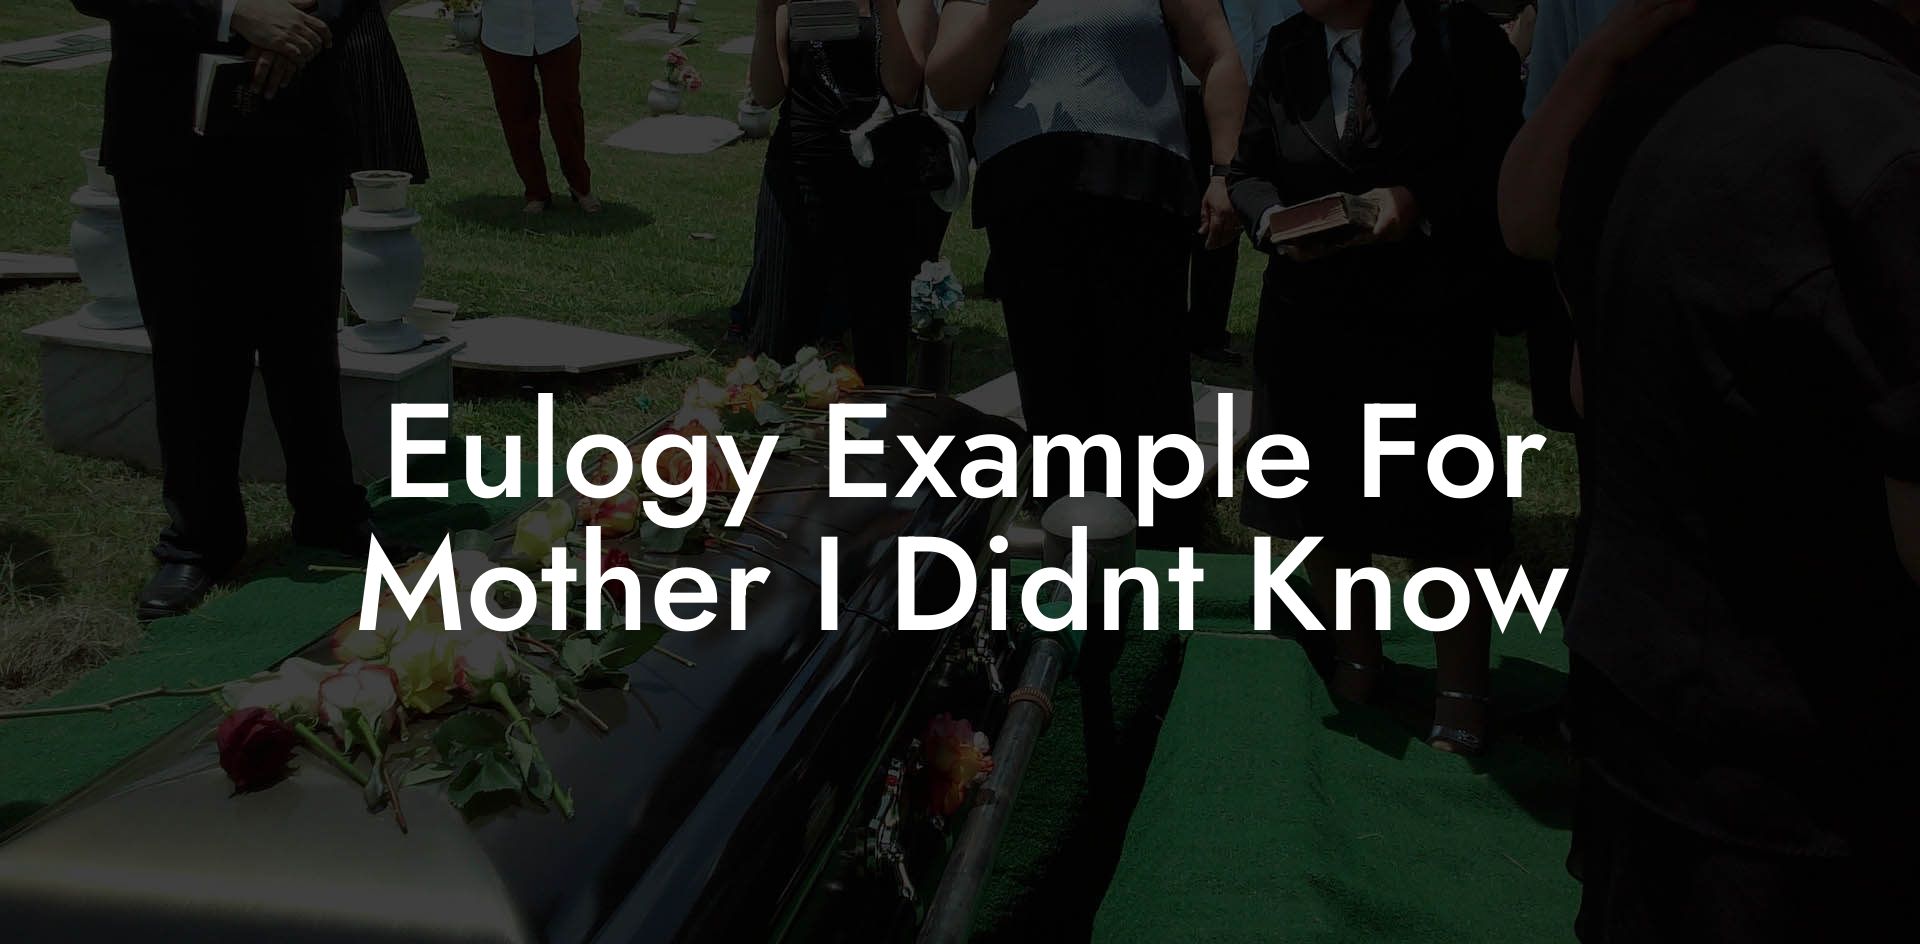 Eulogy Example For Mother I Didnt Know